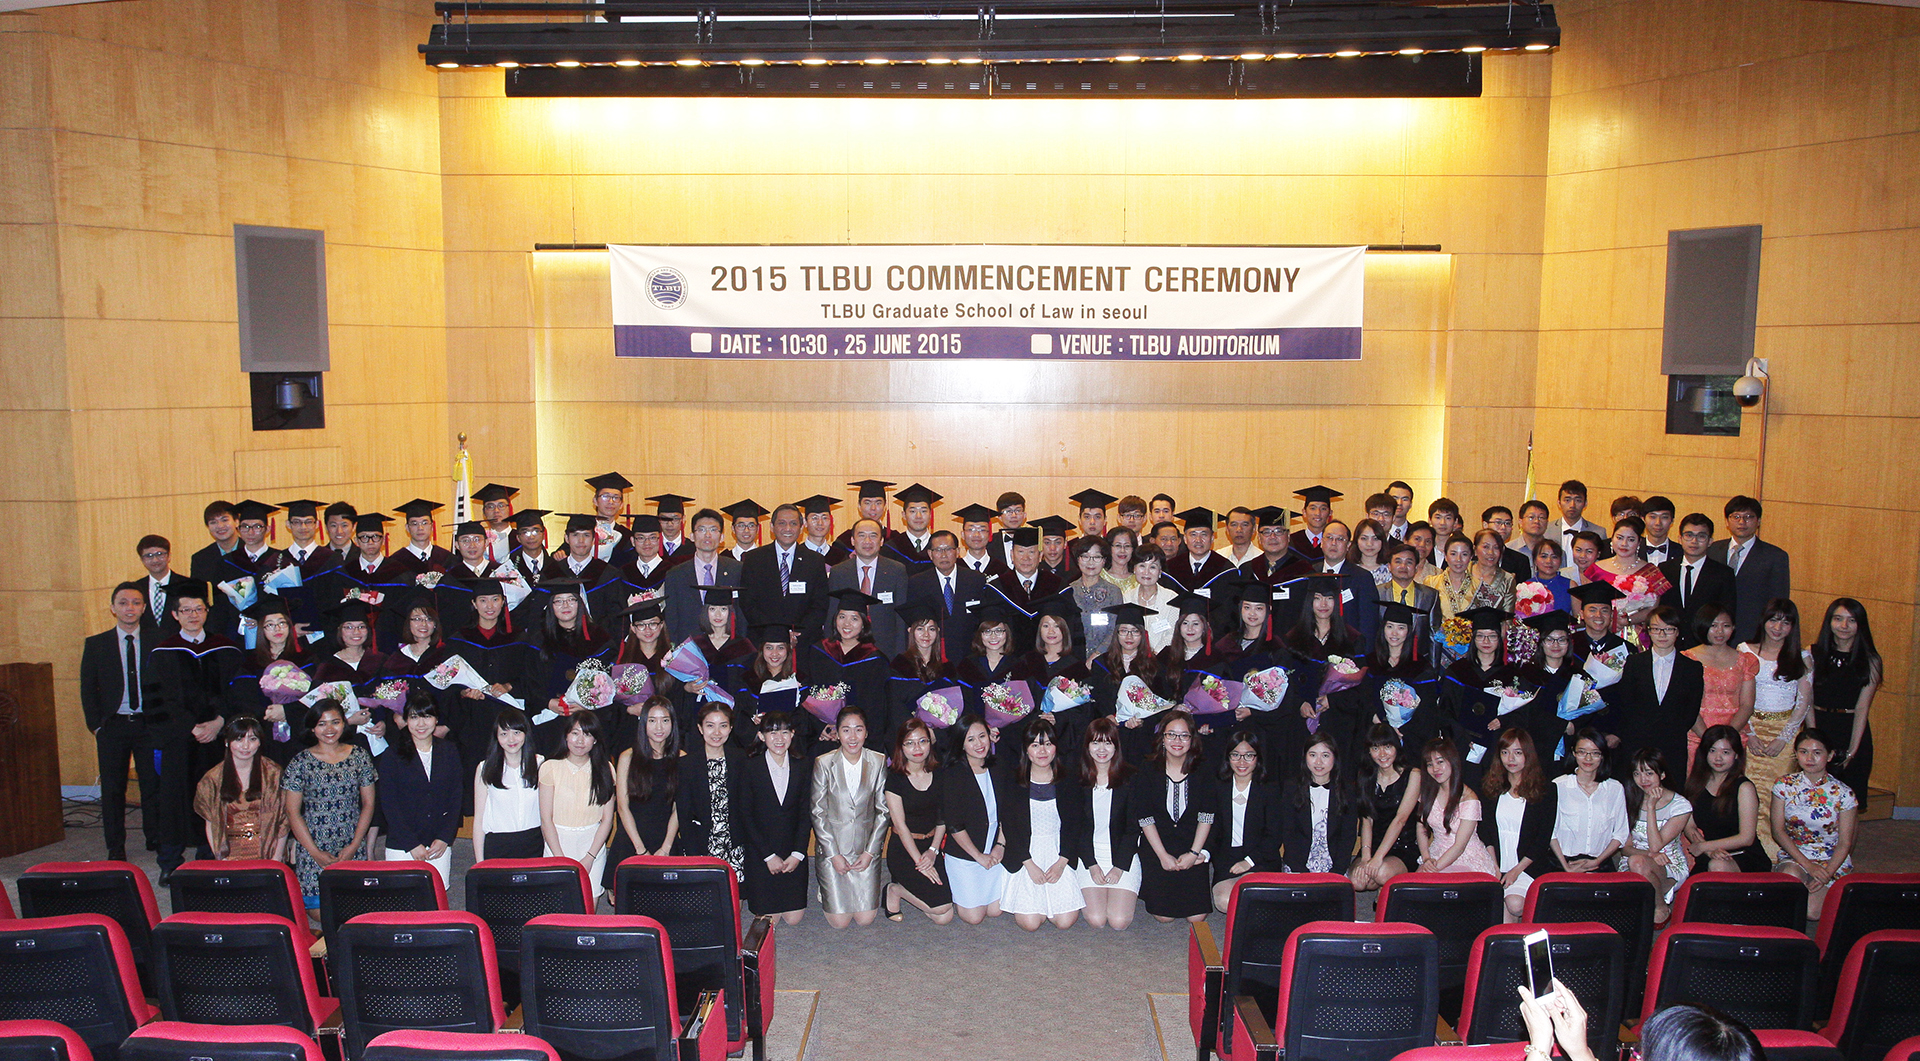 2015 TLBU Commencement Ceremony